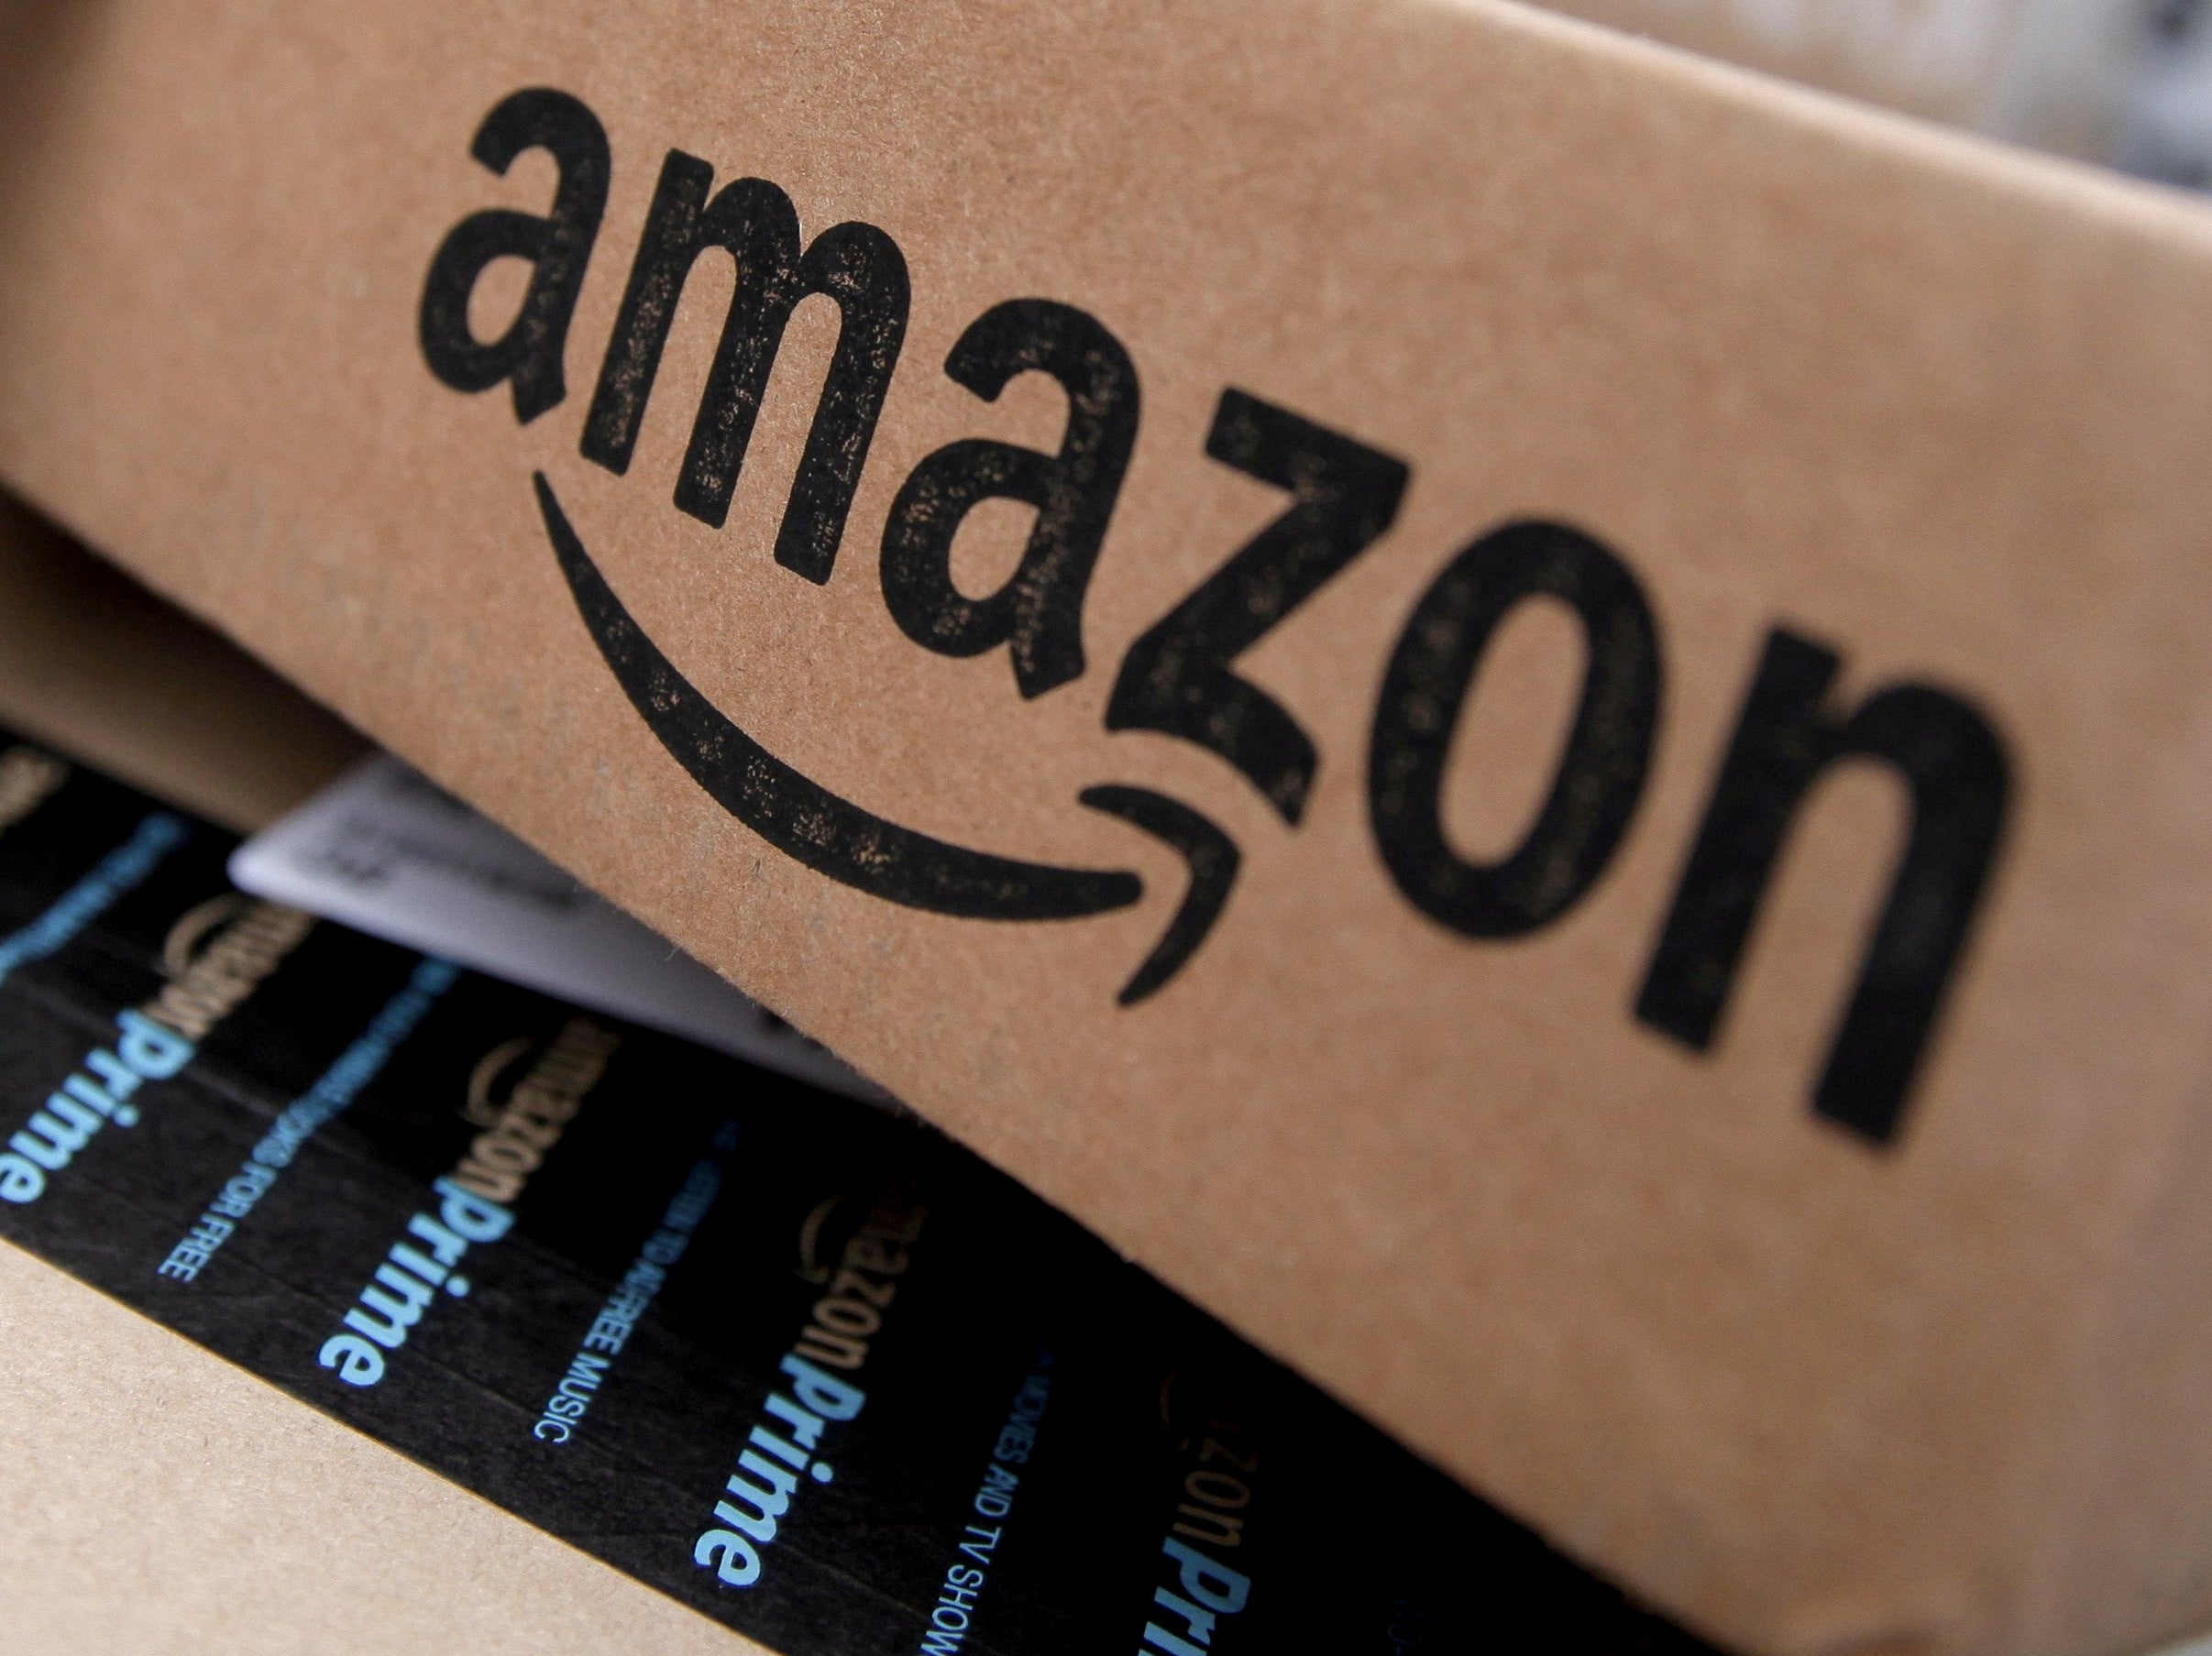 Amazon EU Sarl’s revenues leapt by more than €11bn in a year